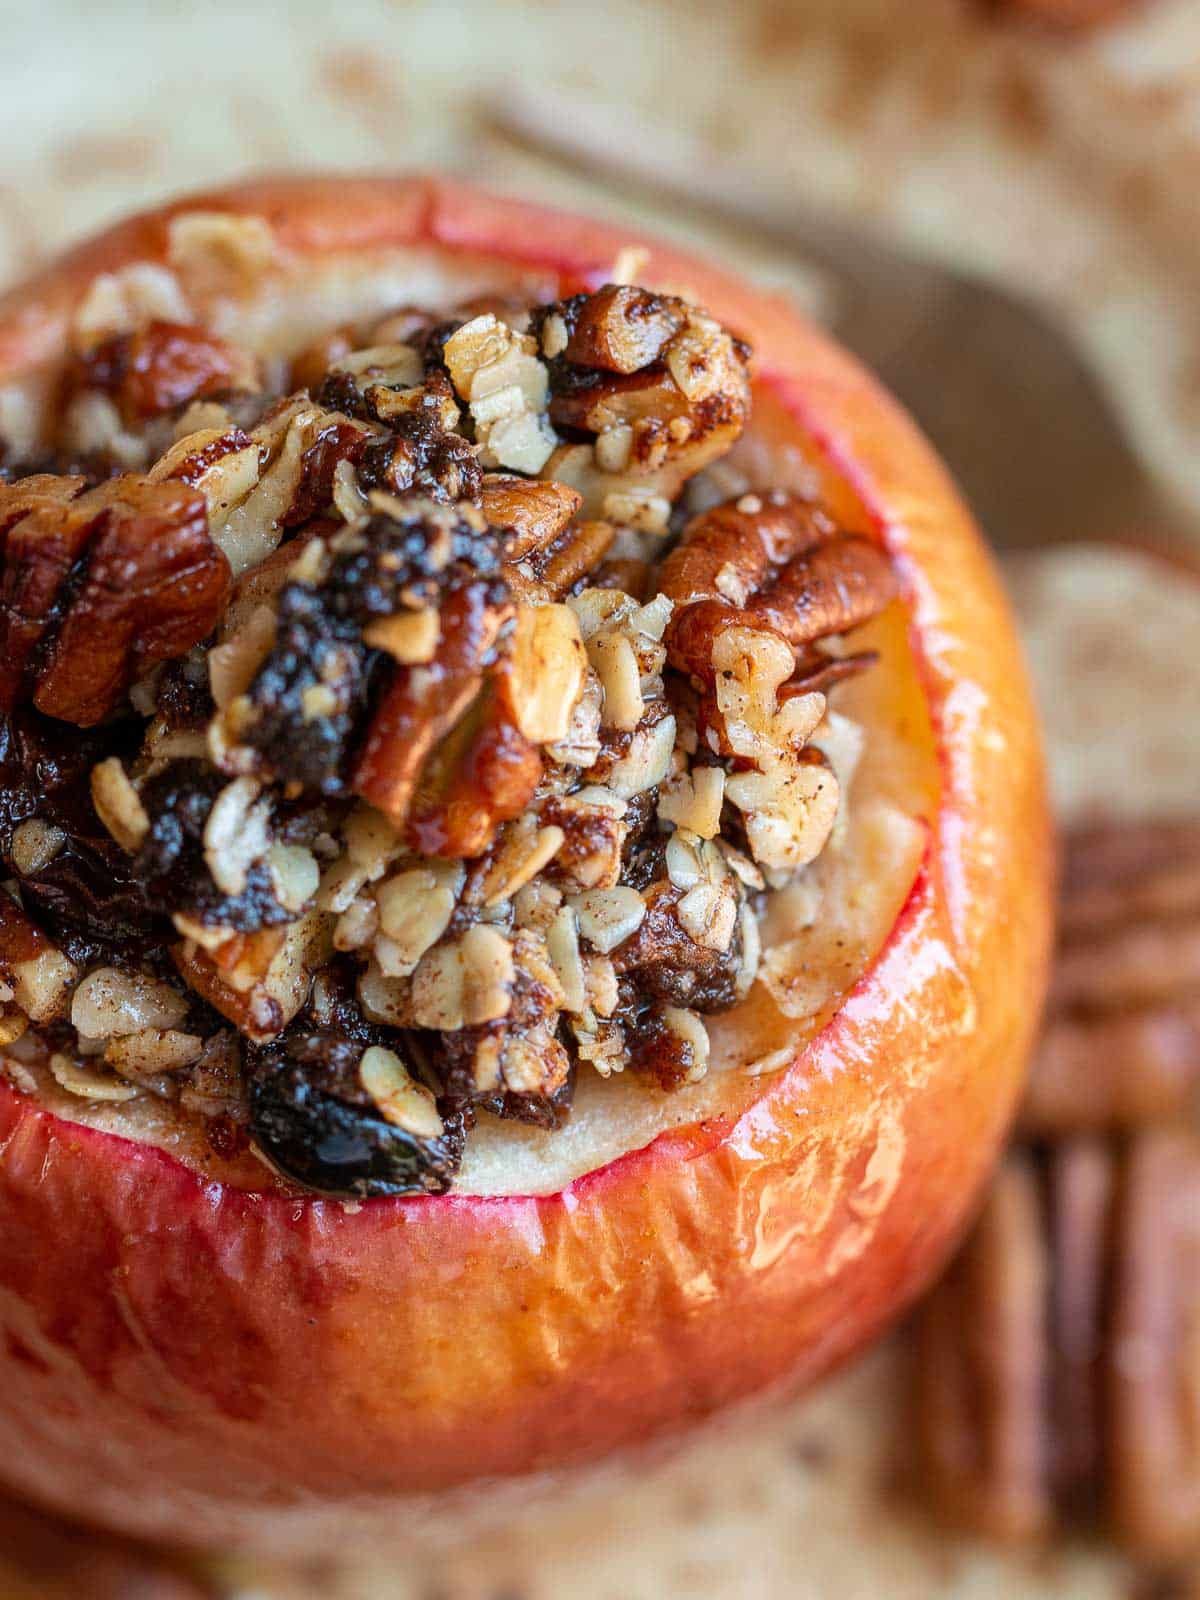 Close up shot of the filling of the stuffed baked apple showing the date paste, pecans and oats inside the apple.